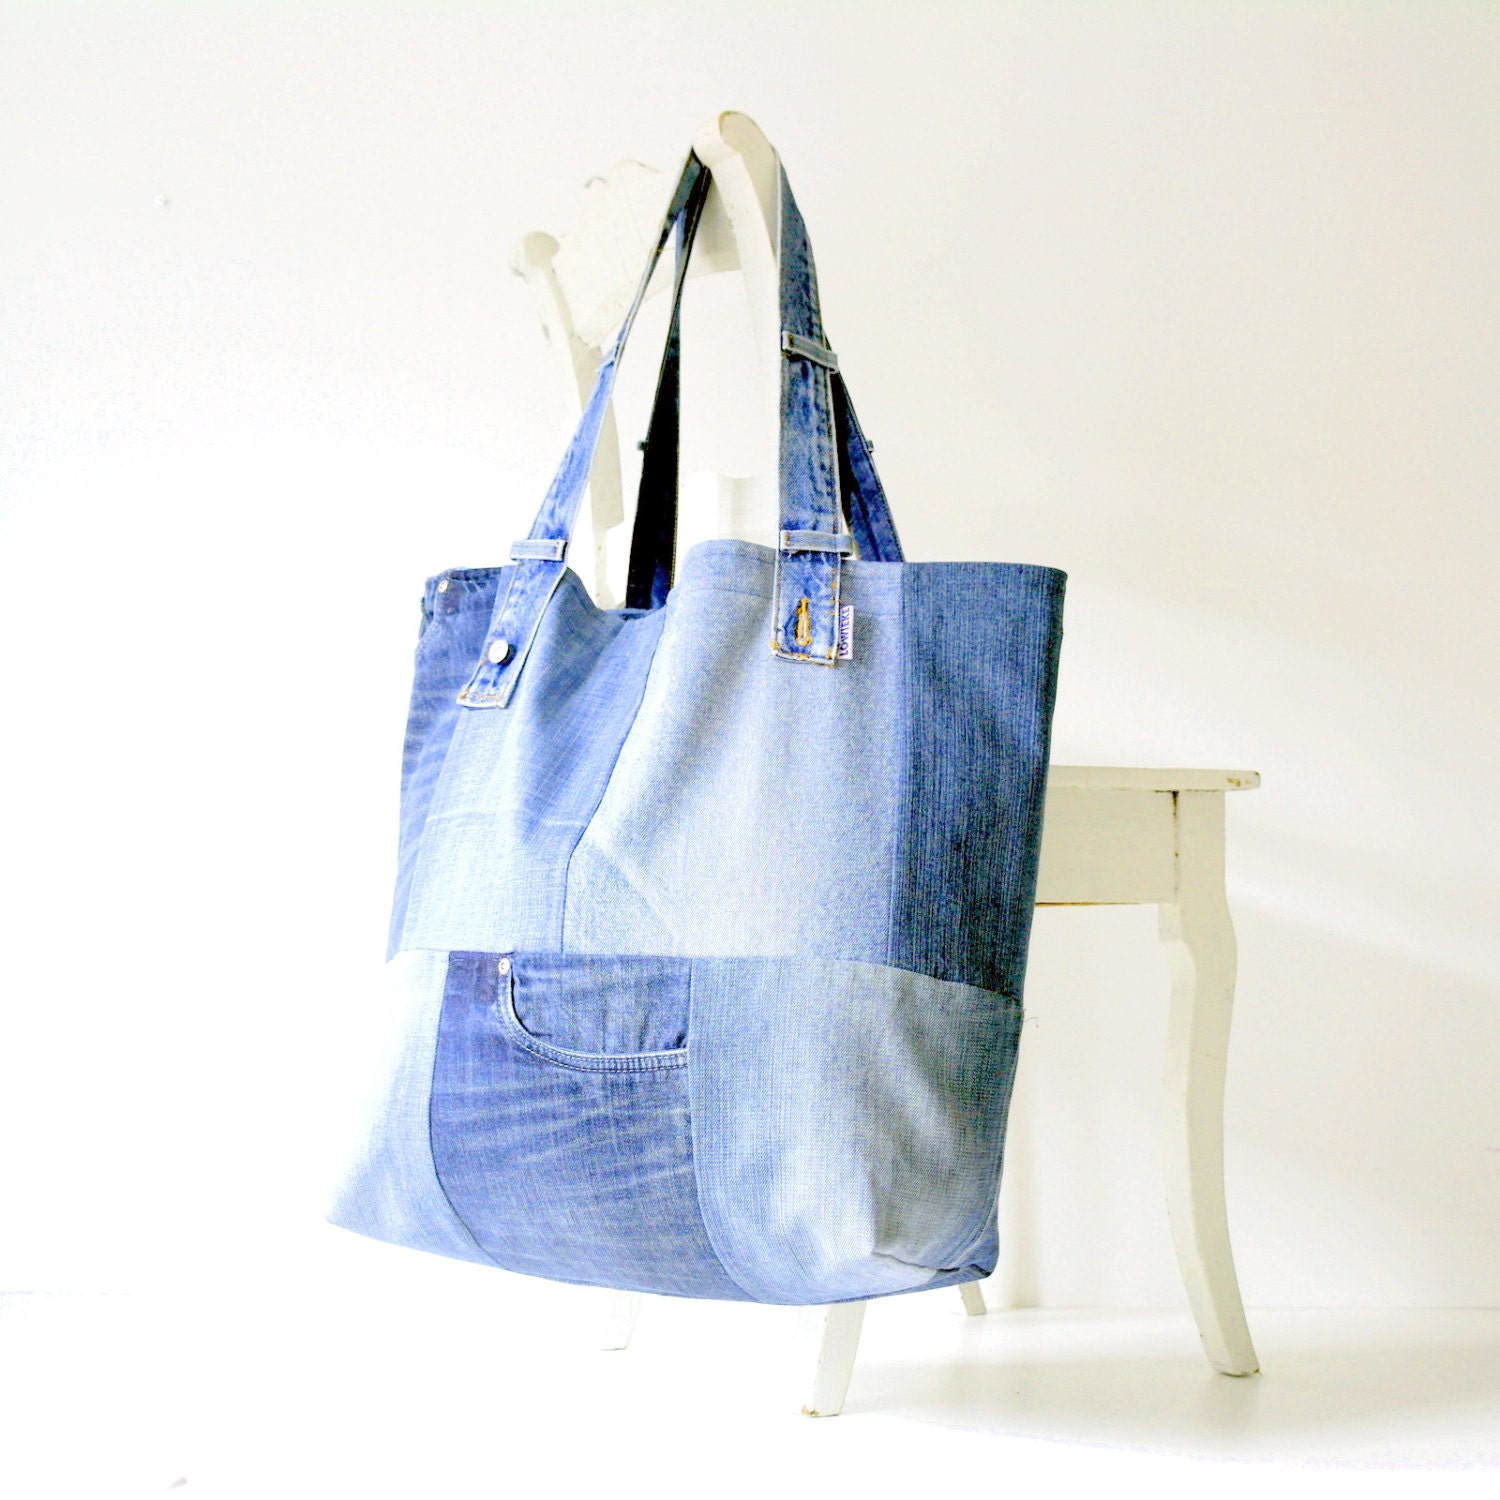 XXL beach bag recycled jeans patchwork fully lined XL jeans